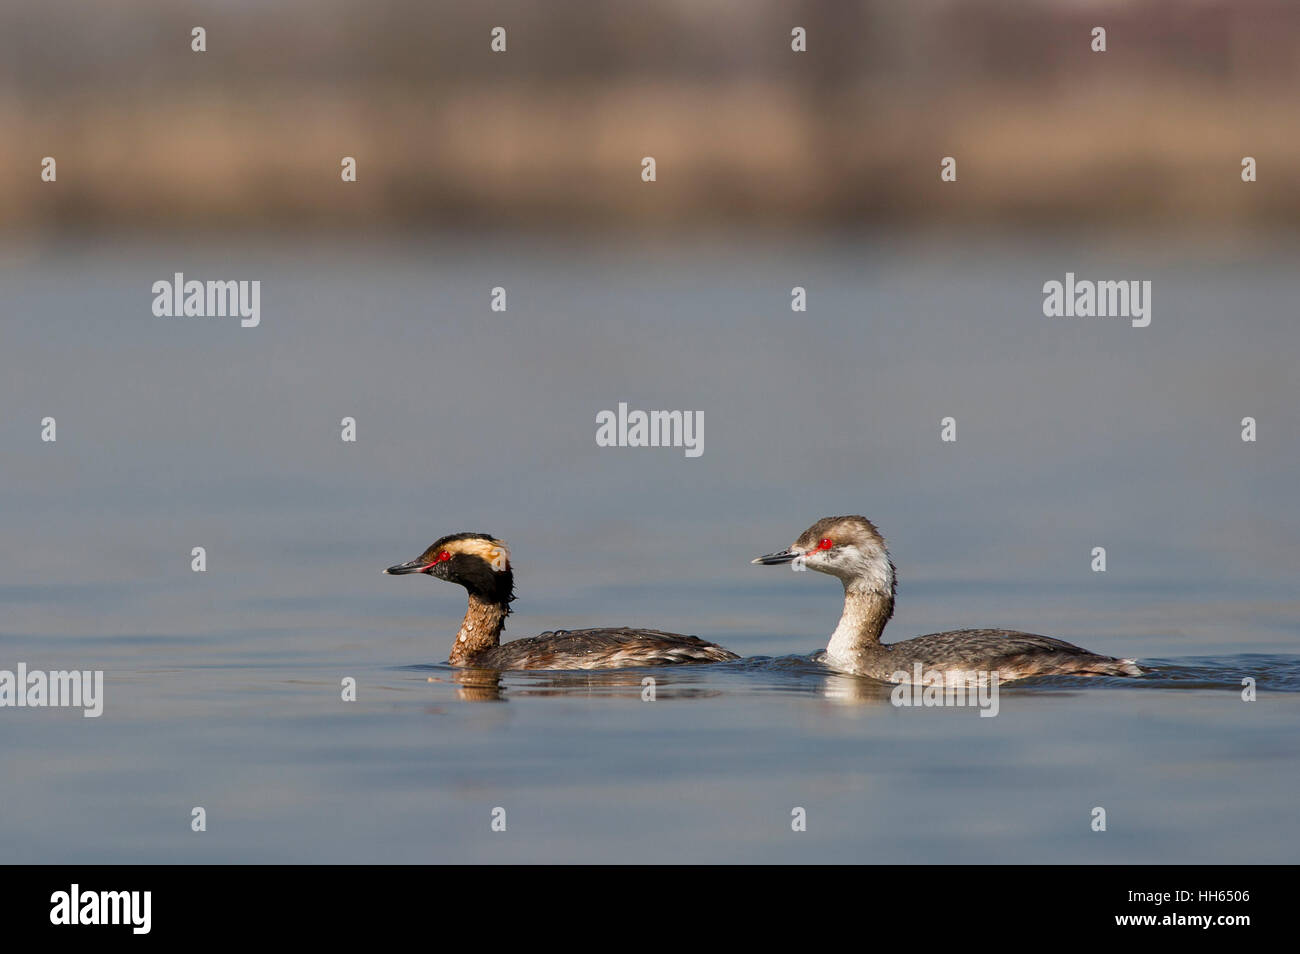 A pair of Horneg Grebes swimming on a calm river on a sunny day. Stock Photo